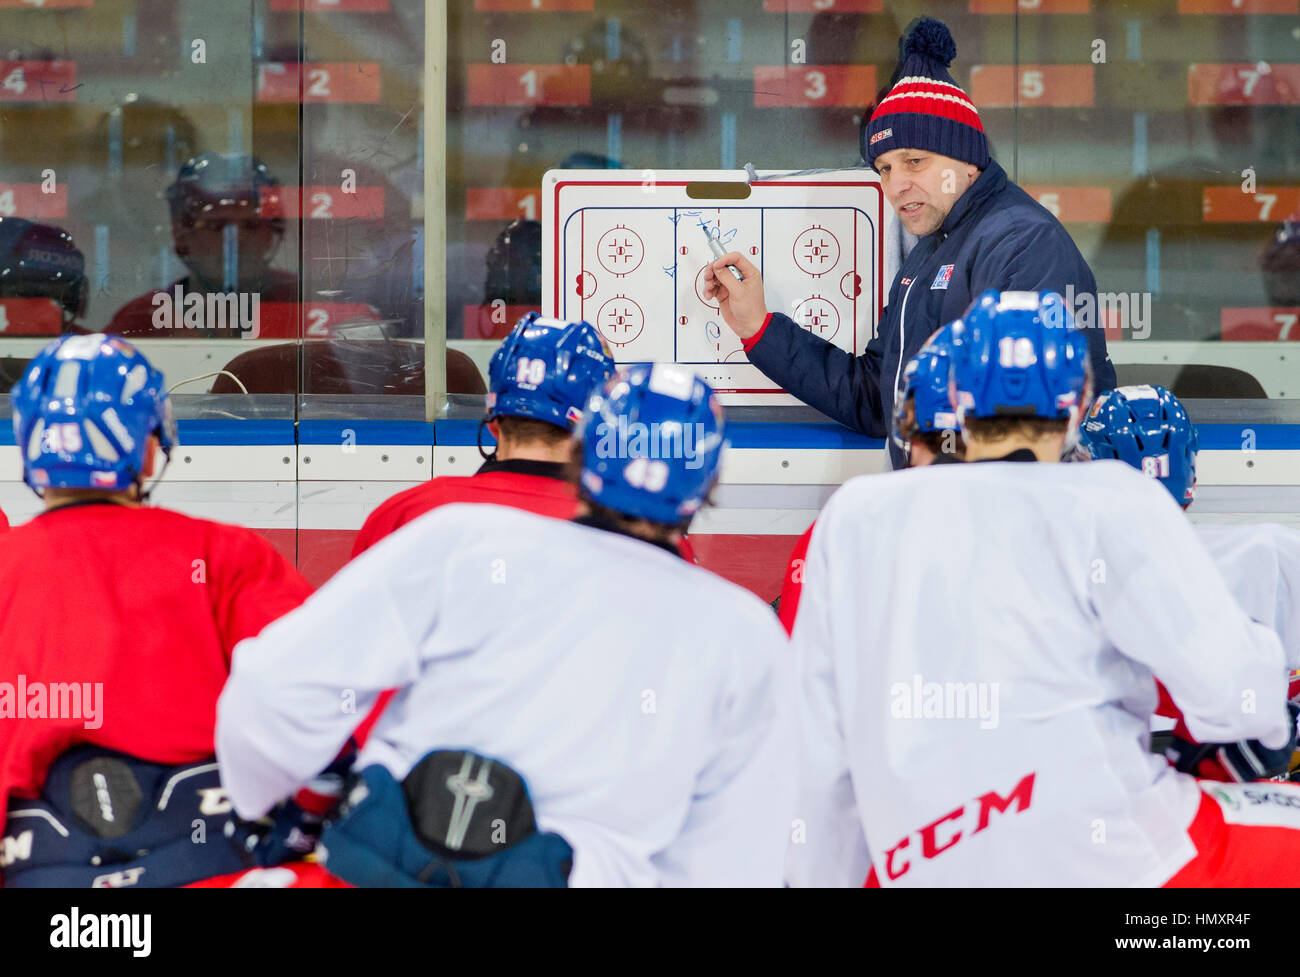 Prague, Czech Republic. 07th Feb, 2017. The Czech national ice-hockey team's coach Josef Jandac in action during the training session prior to the February Sweden Games in Gothenburg in Prague, Czech Republic, February 7, 2017. Sweden Games, the third part of the European Hockey Tour (EHT) series, will take place on February 9-12. Credit: Vit Simanek/CTK Photo/Alamy Live News Stock Photo